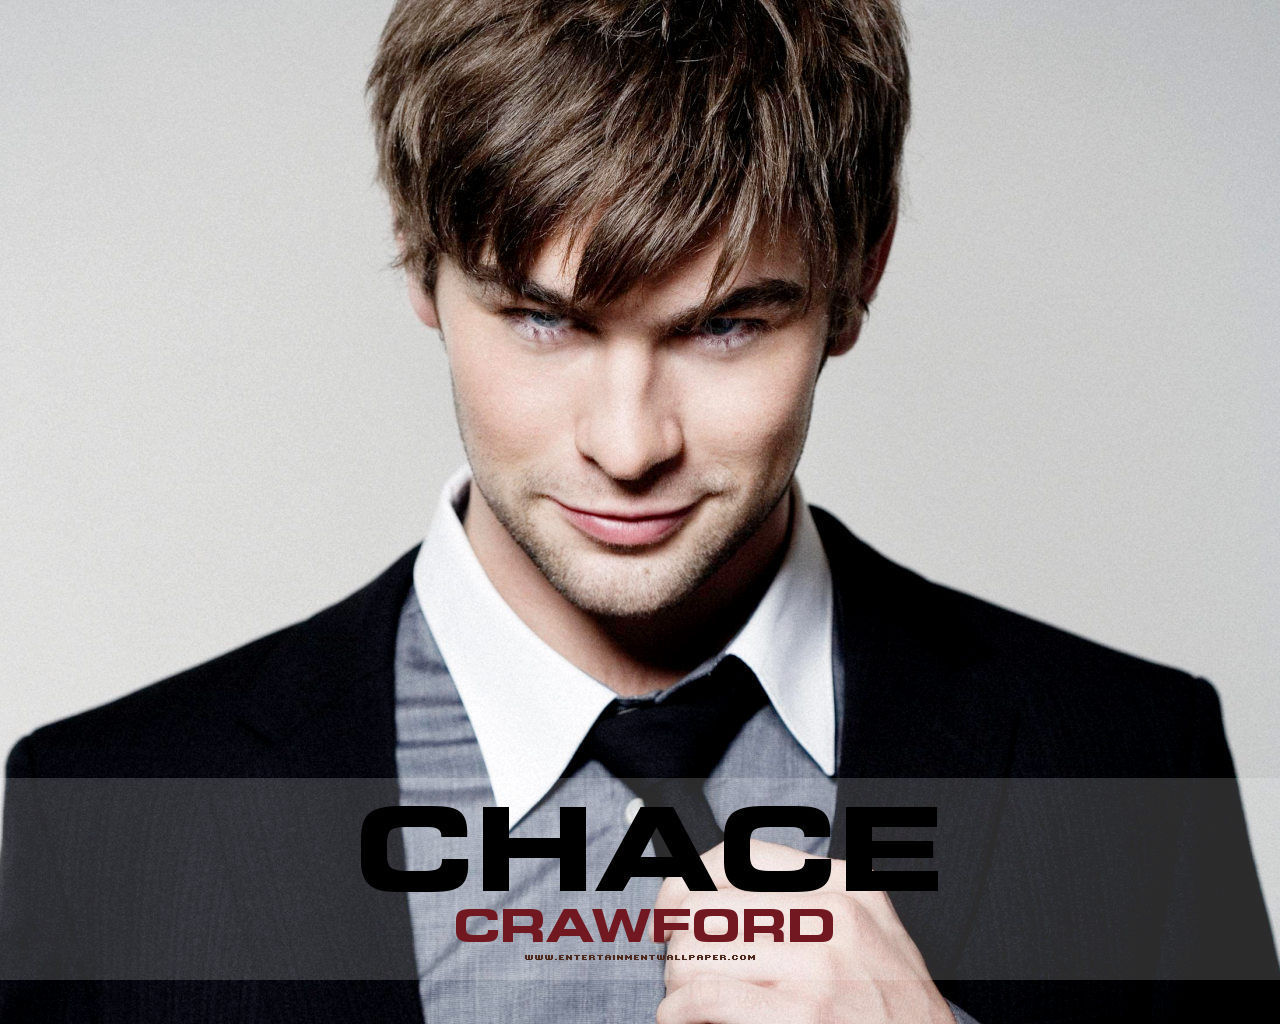 Chace Crawford Net Worth